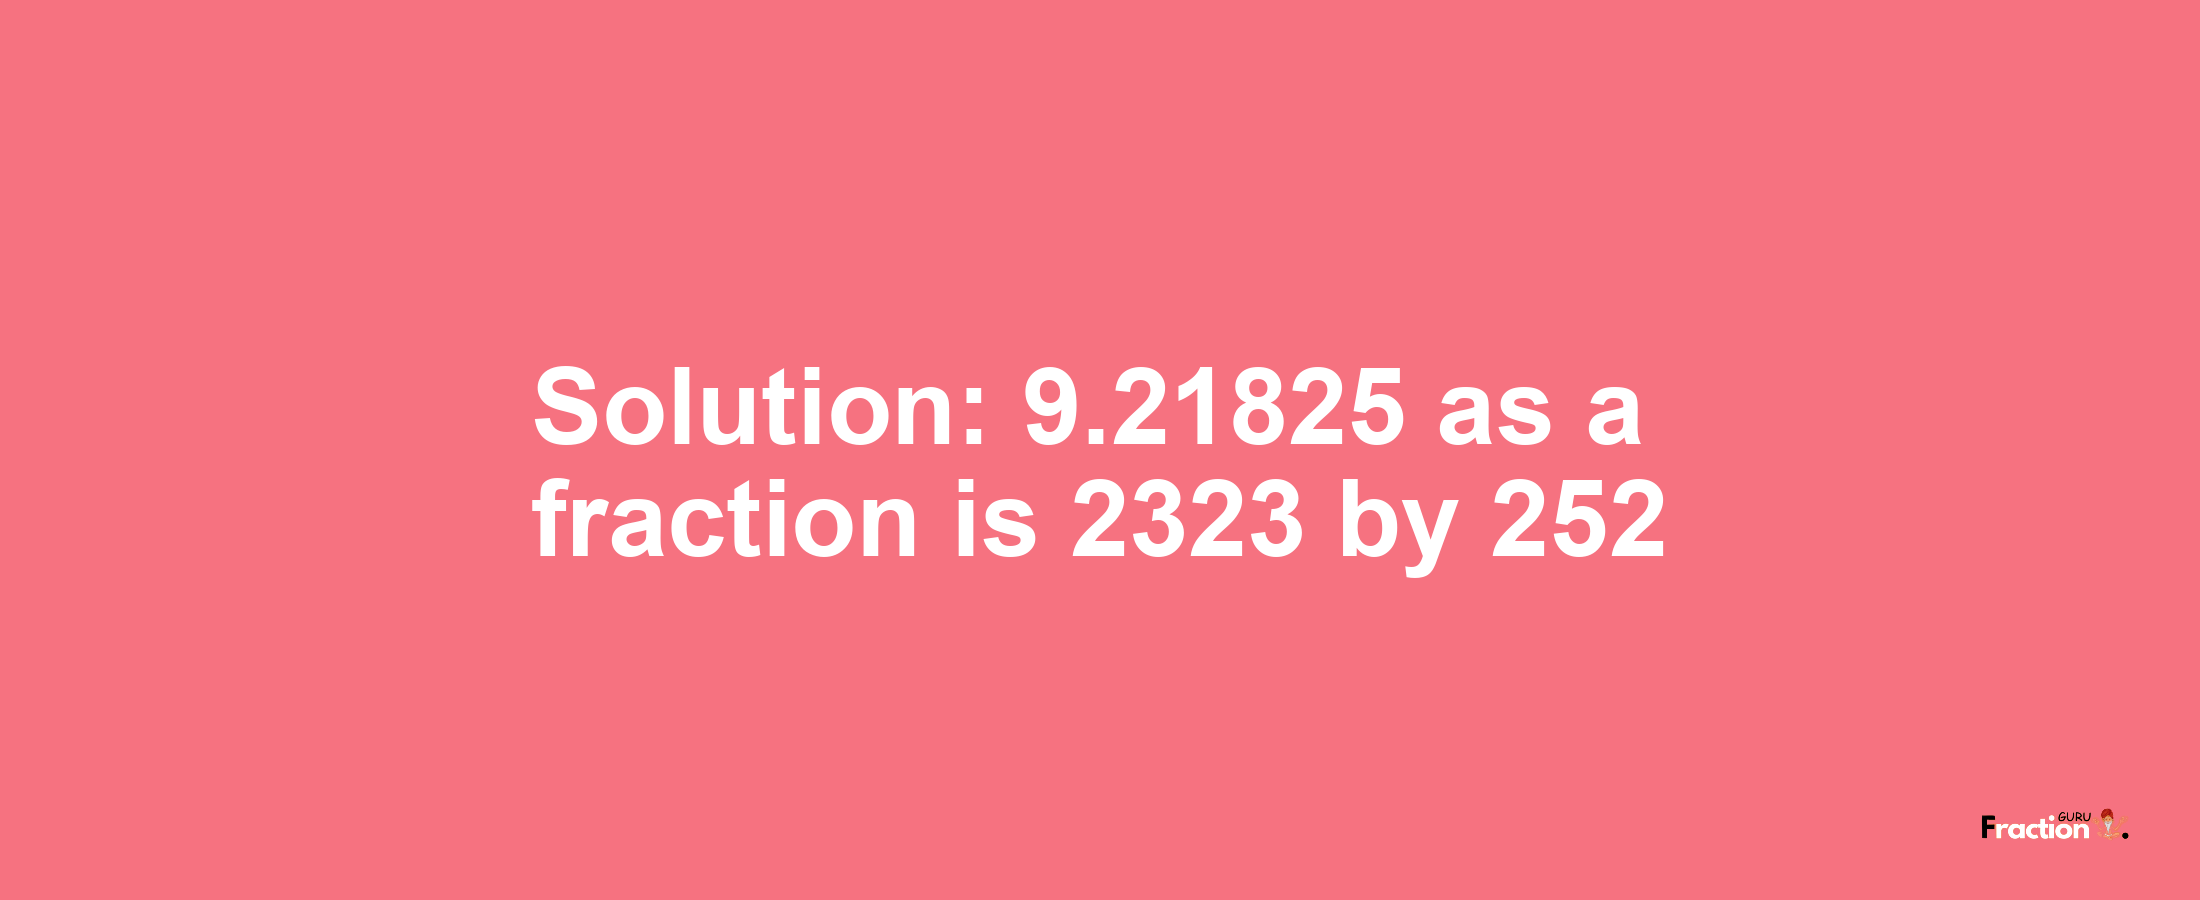 Solution:9.21825 as a fraction is 2323/252